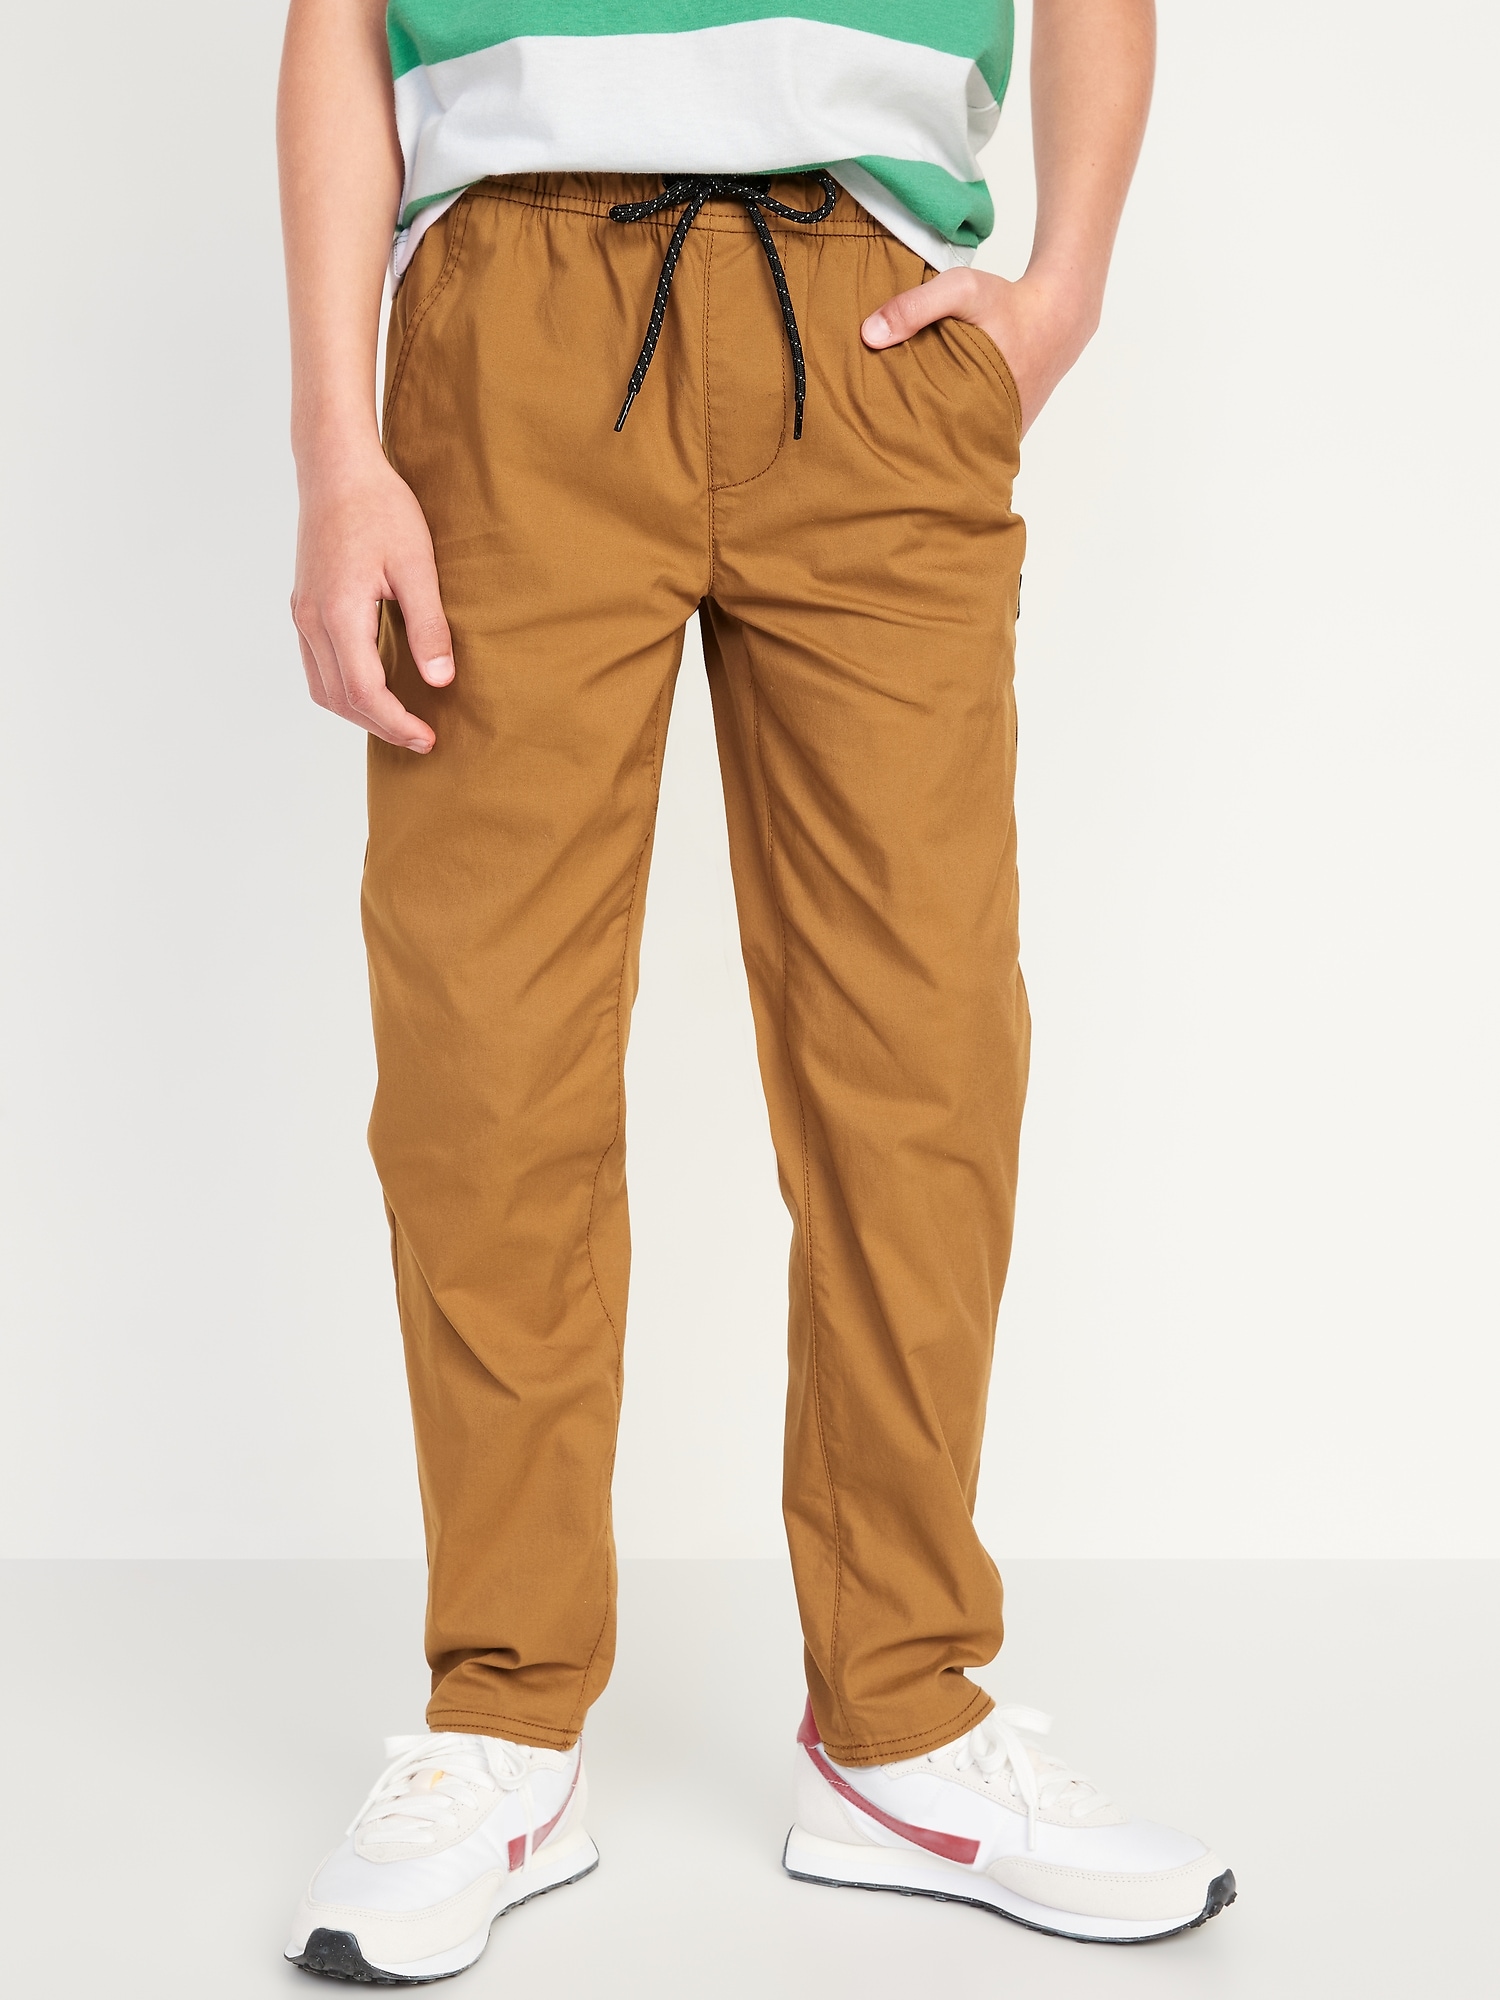 Old Navy Built-In Flex Tapered Tech Pants for Boys brown. 1